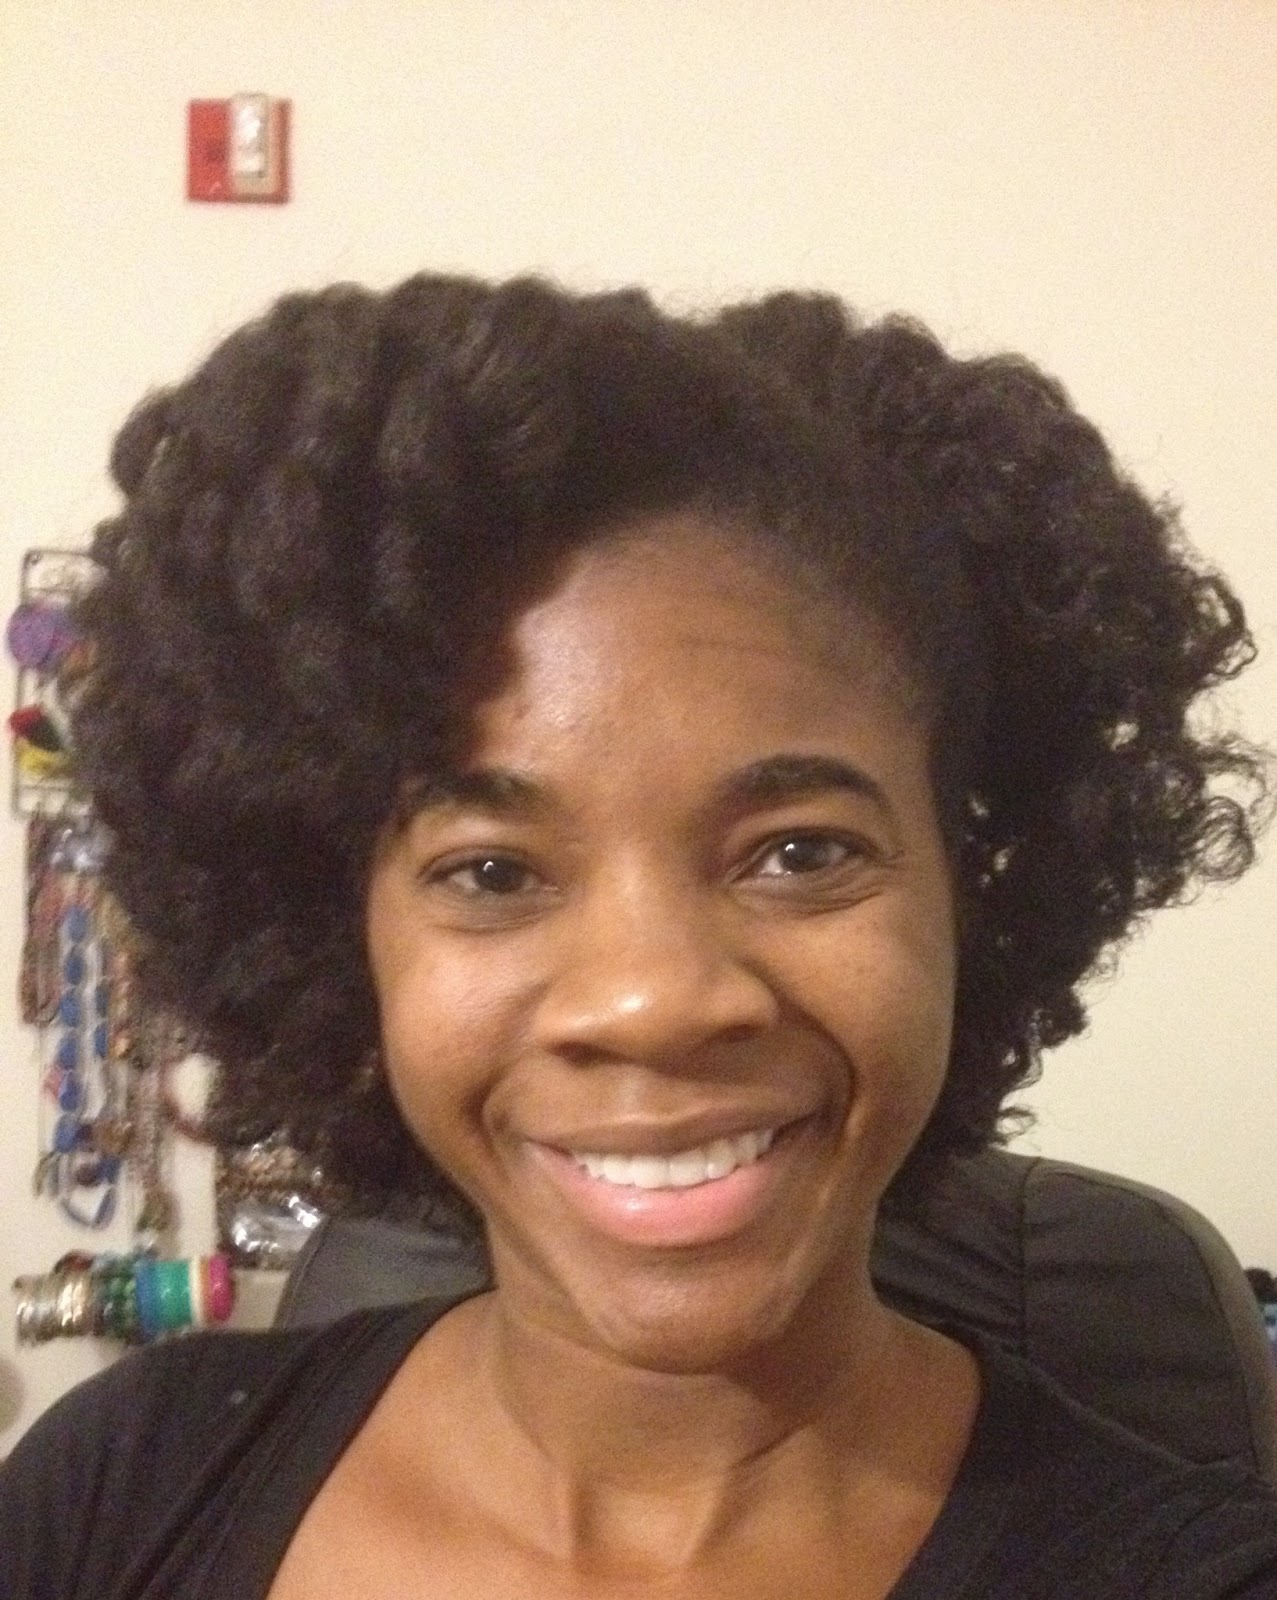 6FOOTLONGHAIR: Bantu-Knot Out on Natural Hair- Complete FAIL